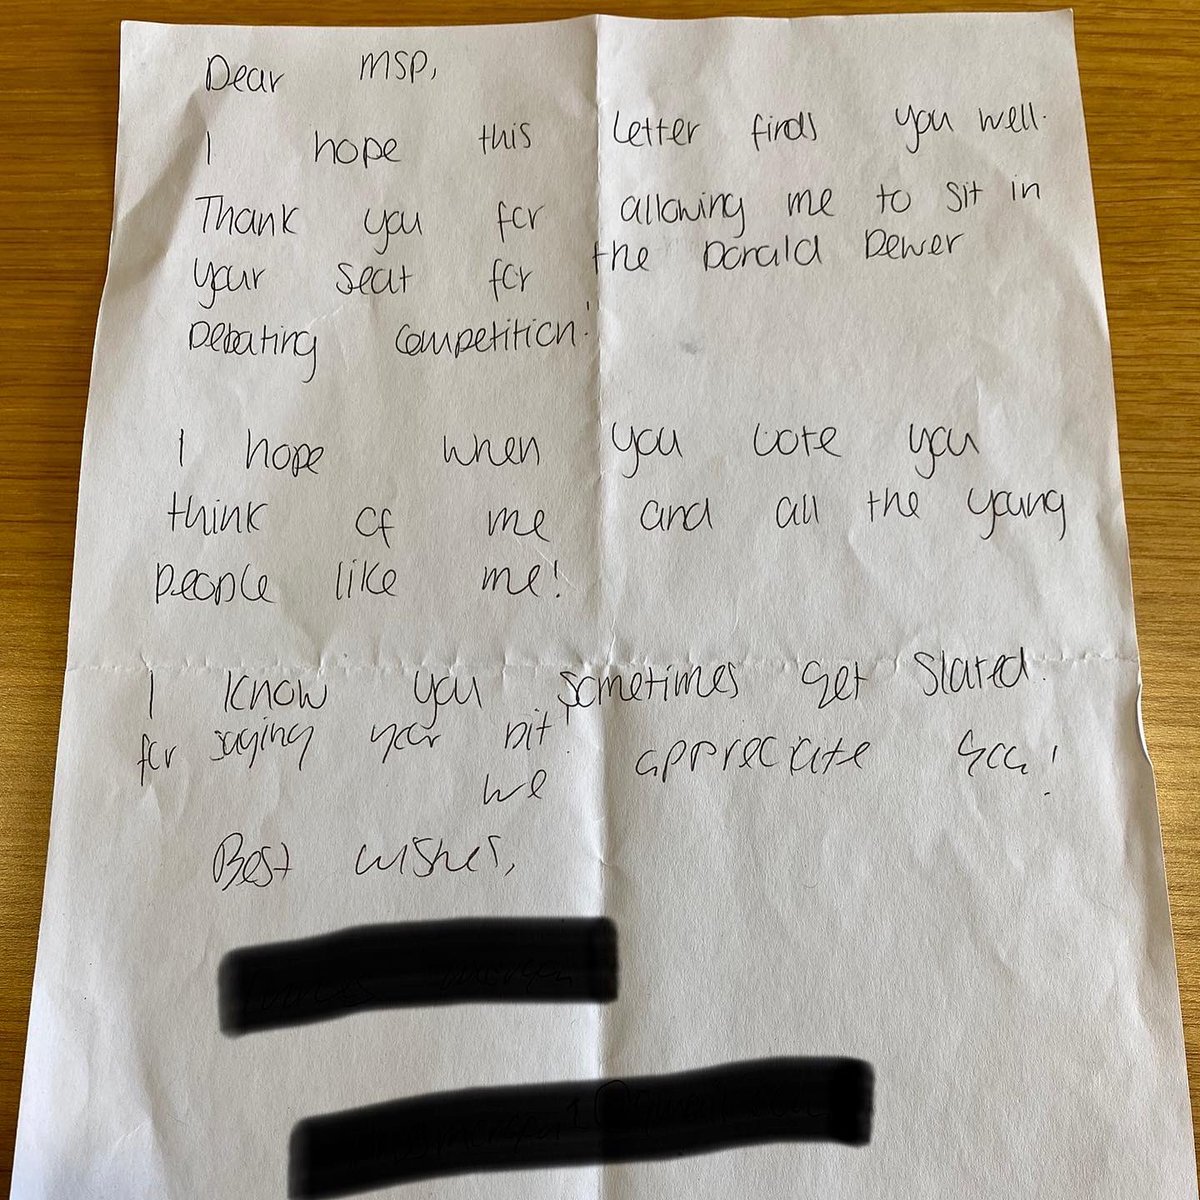 Found this letter in one of the drawers in the desks in the @ScotParl Chamber.❤️ In our diversity, and with our different perspectives, together let’s makes Scotland better.🏴󠁧󠁢󠁳󠁣󠁴󠁿 #youngpeople #brightfuture #democracy #respectfuldialogue #weareScotland